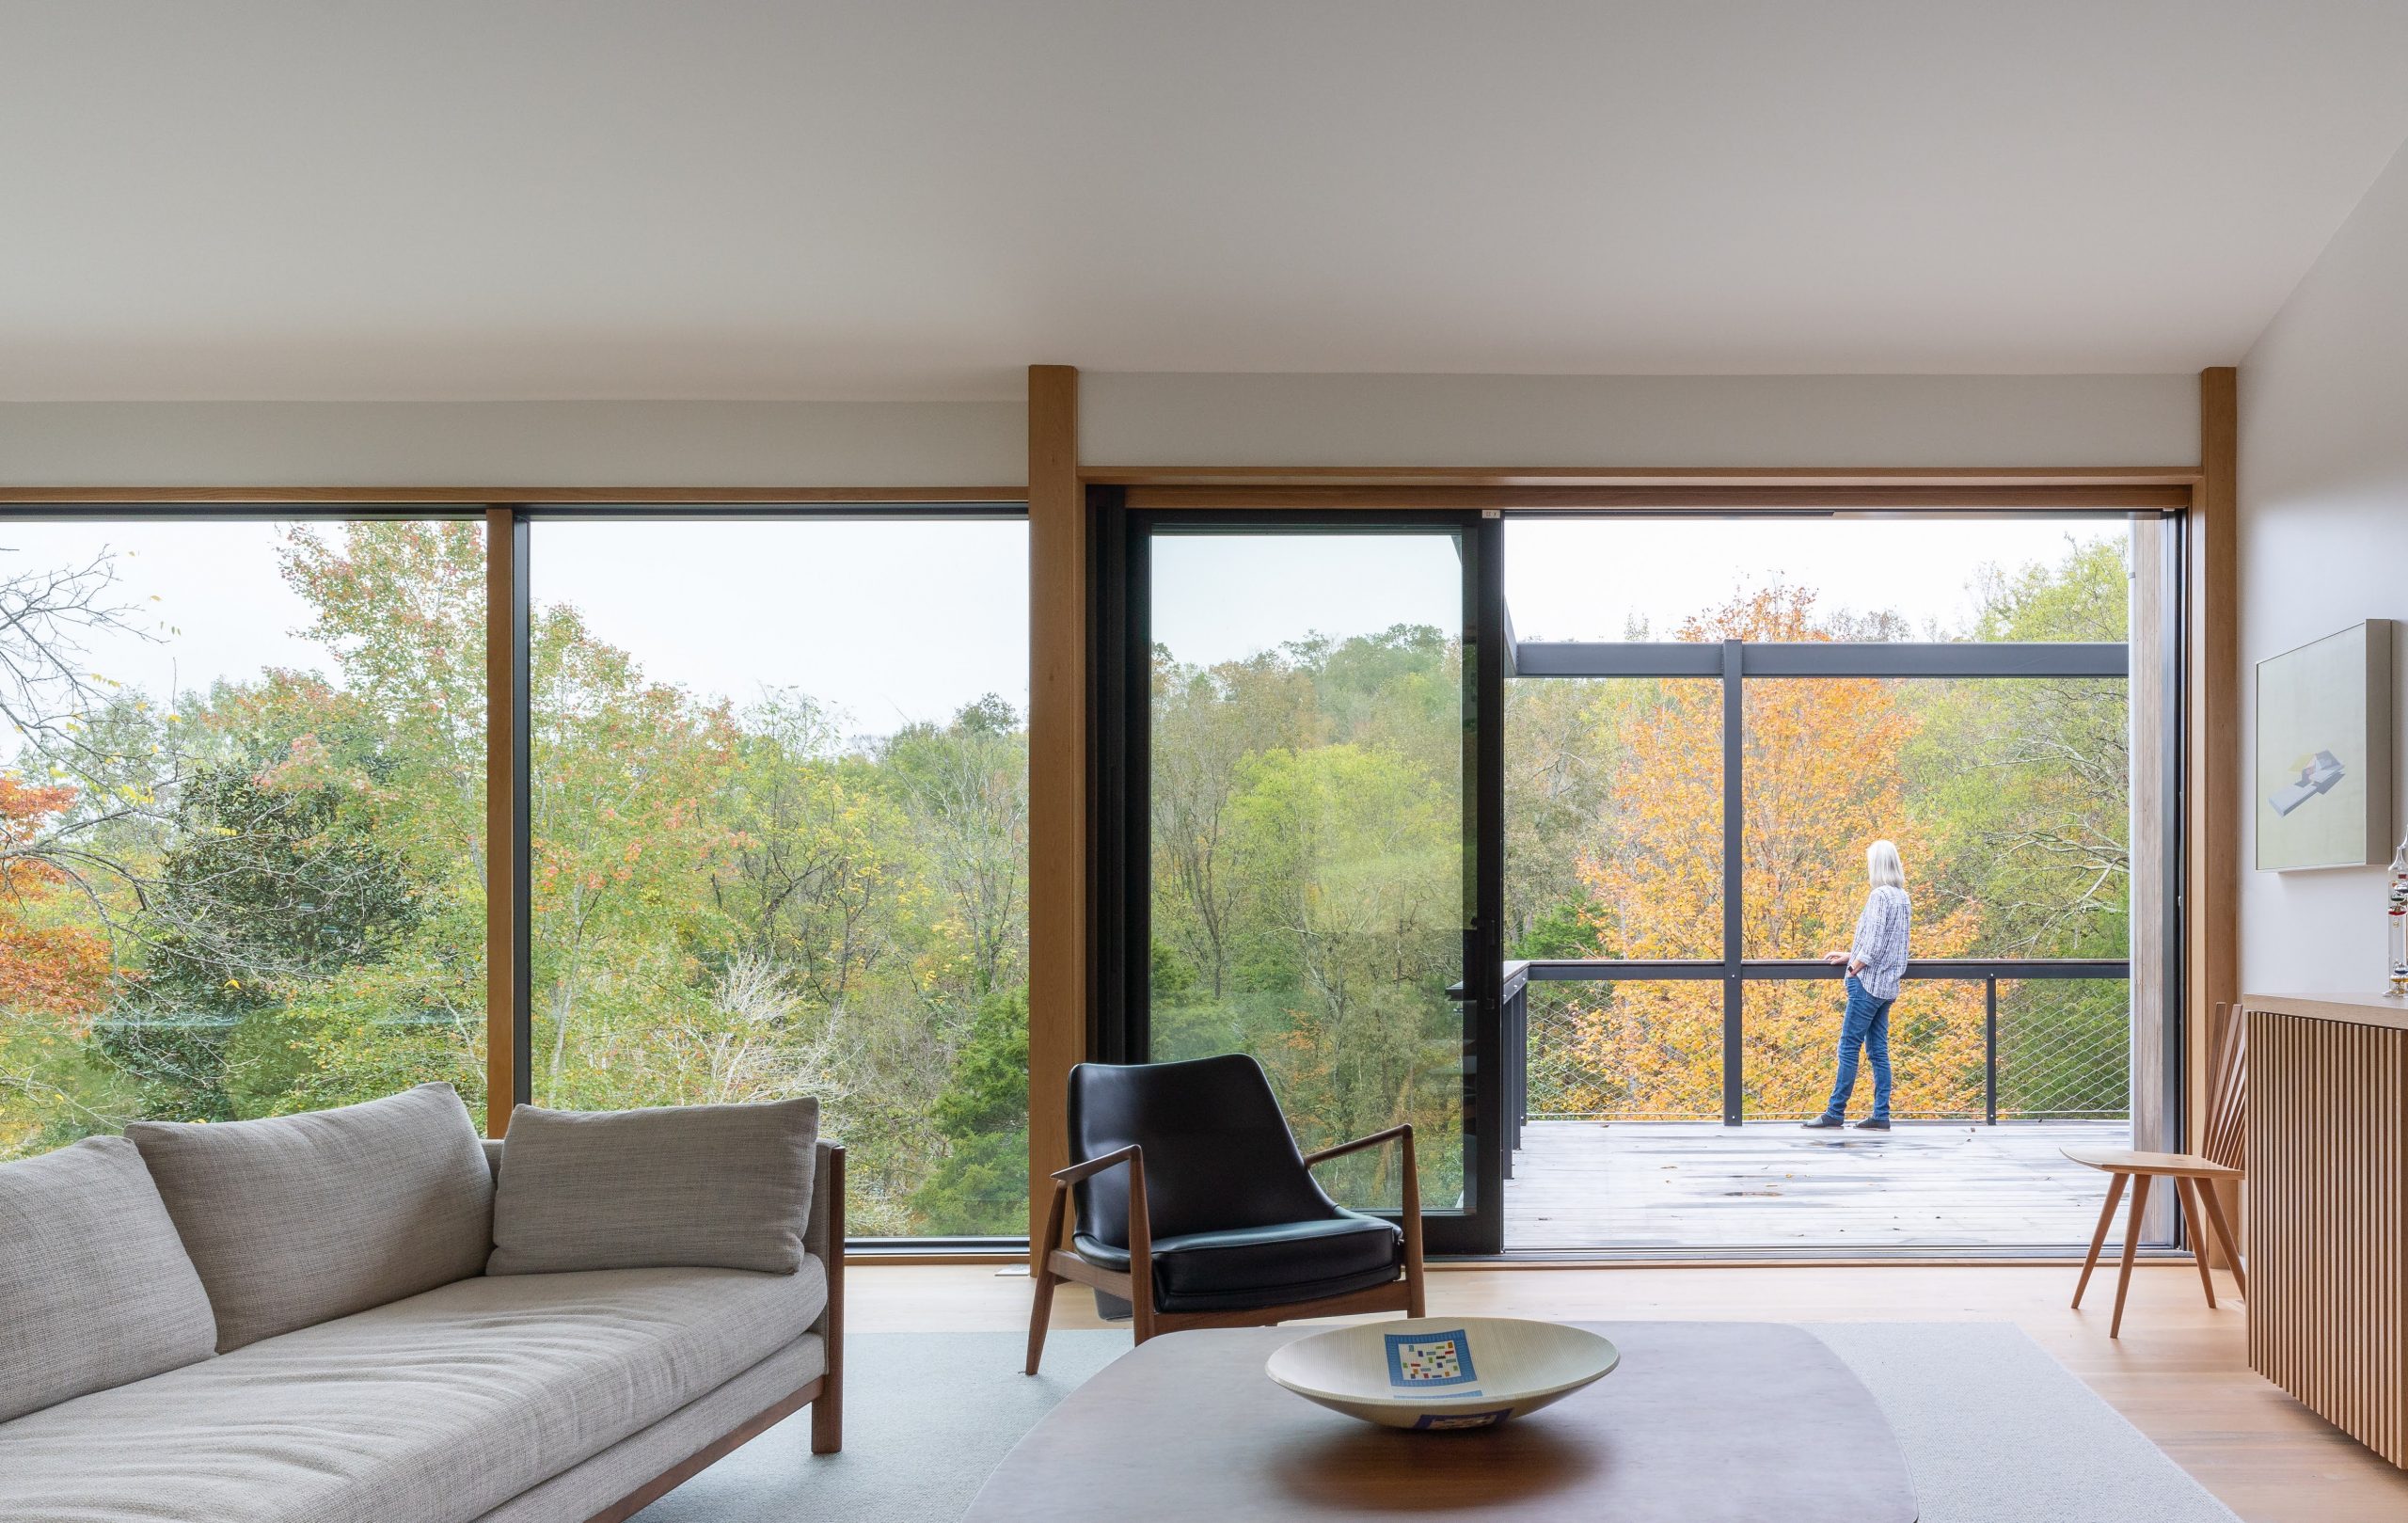 Interior view of the second story living room with lavish monochrome furnishings and a person on the outside balcony looking at the woods of the Wood Screen House in Nashville, Tennessee during the day featuring Kebony Modified Wood Clear Cladding on the siding